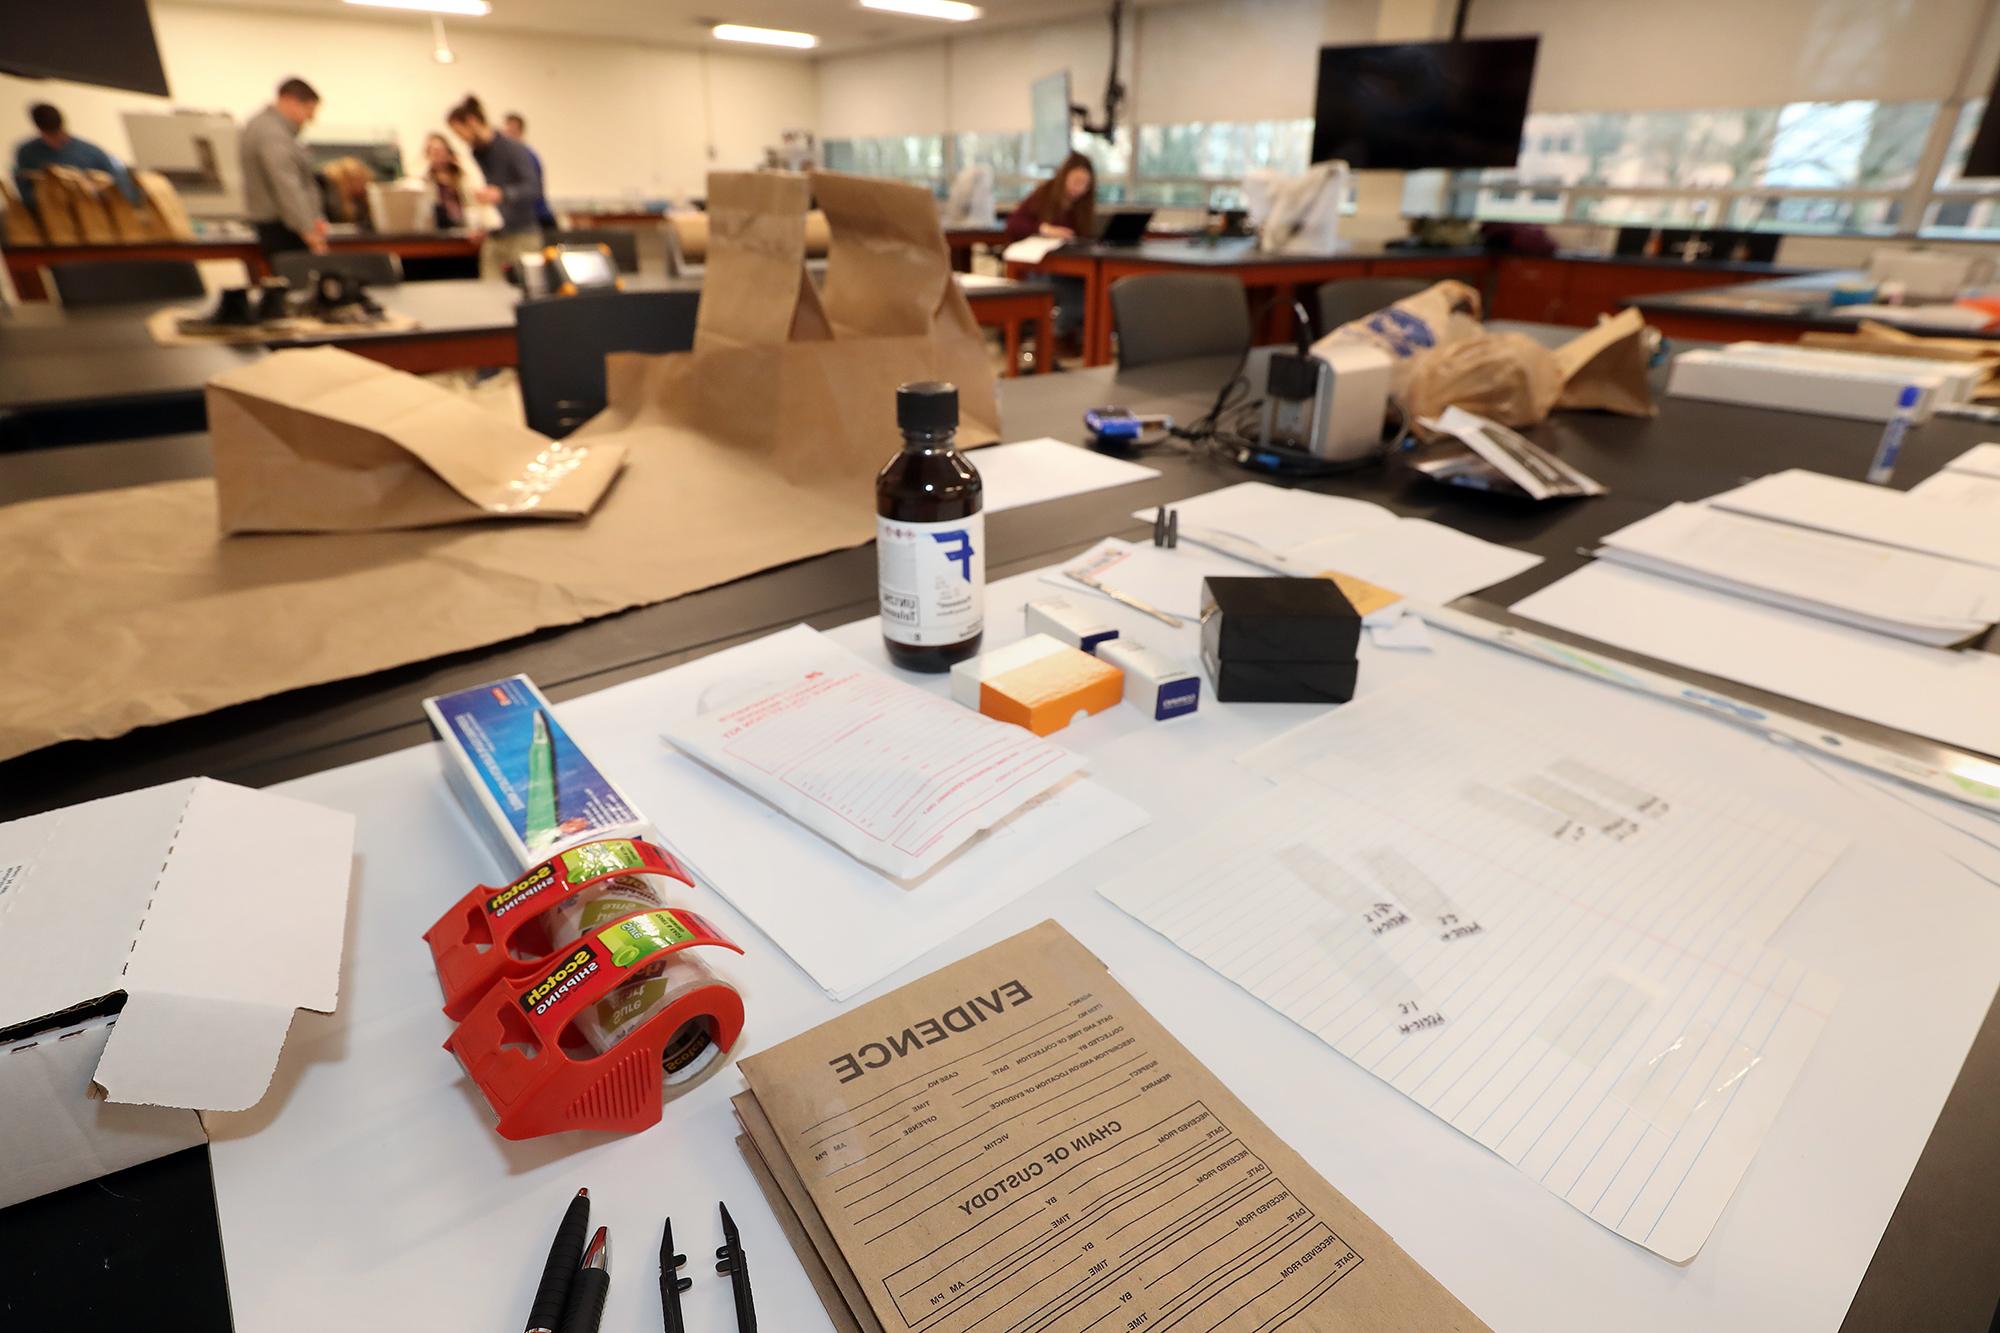 A table 在 BGSU forensic lab features brown paper evidence bags, chemicals and others tools that the students 在 background use to process crime scene evidence.